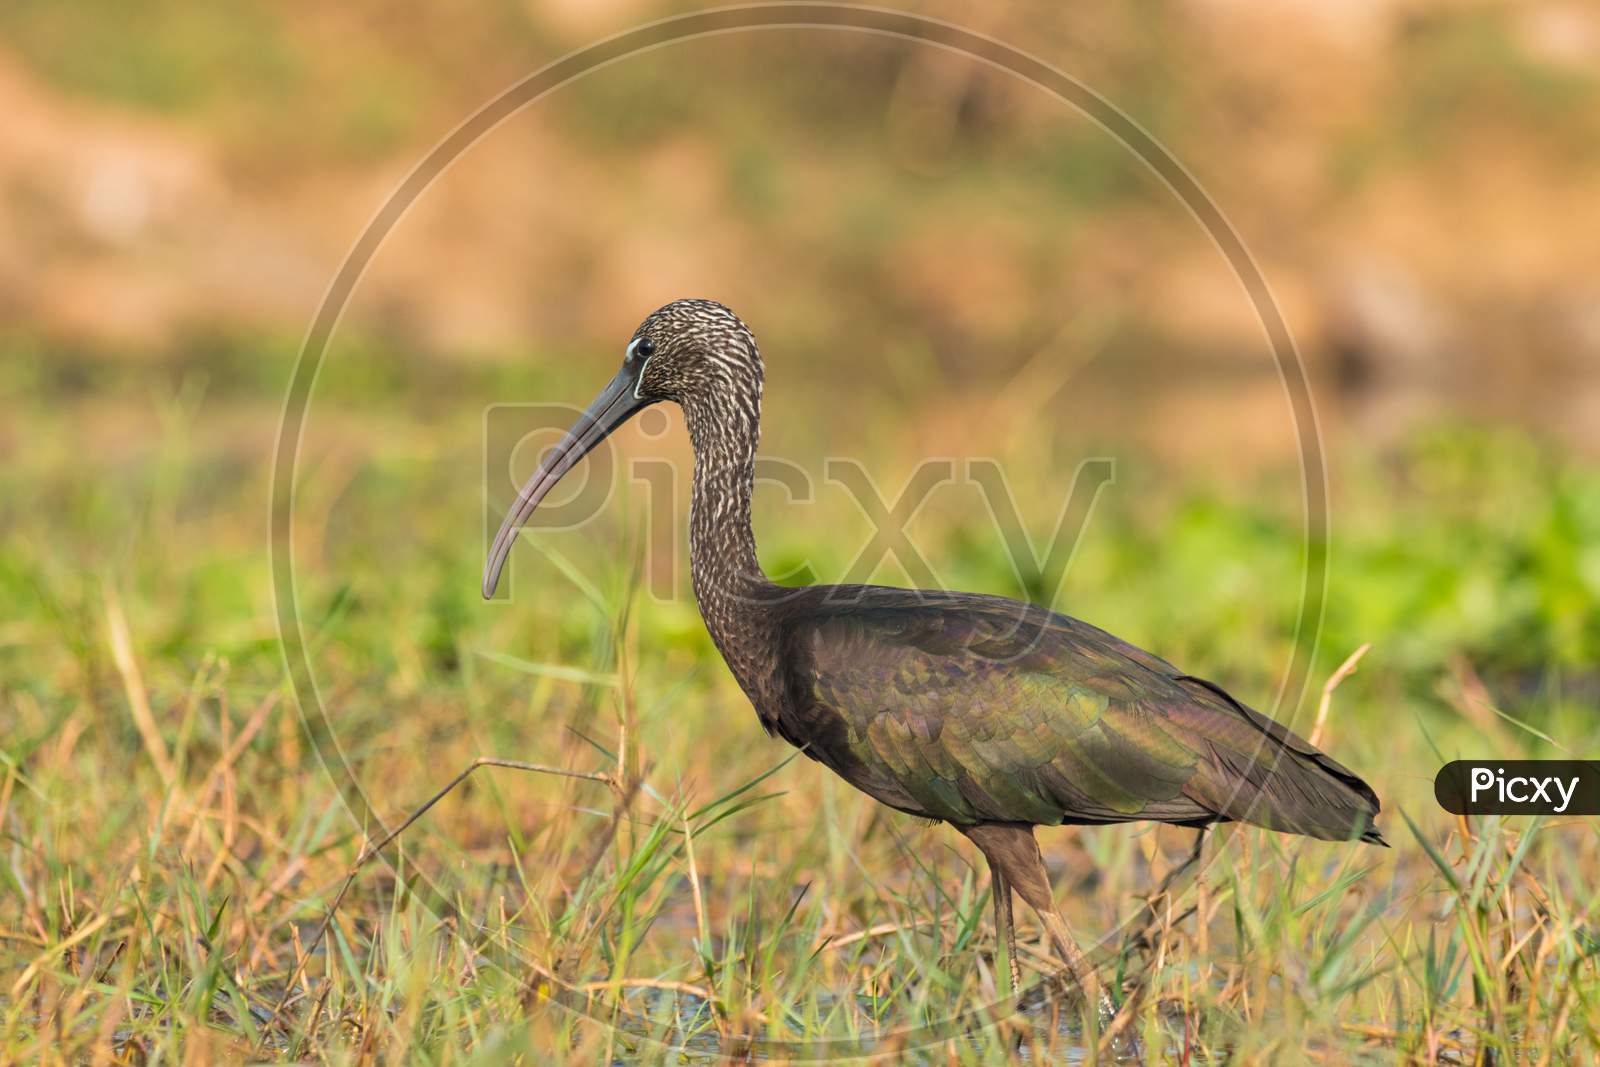 Glossy ibis in backwater